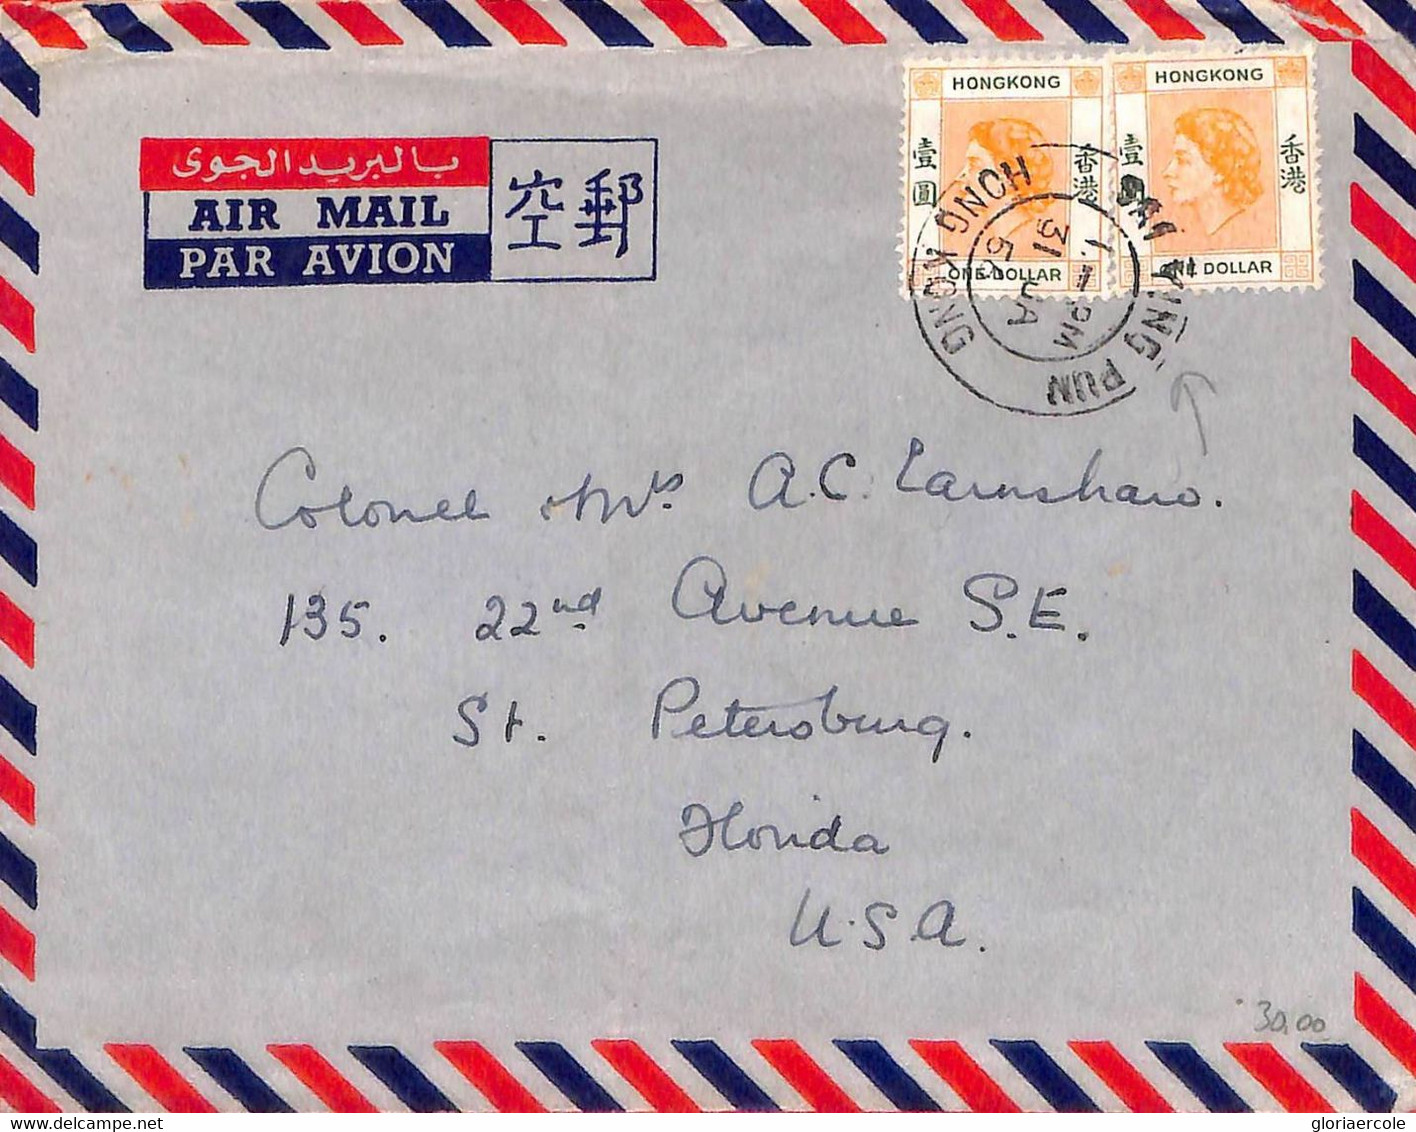 Aa6814 - HONG KONG - POSTAL HISTORY -  COVER From SAI YUNG PUN To The USA  1956 - Lettres & Documents